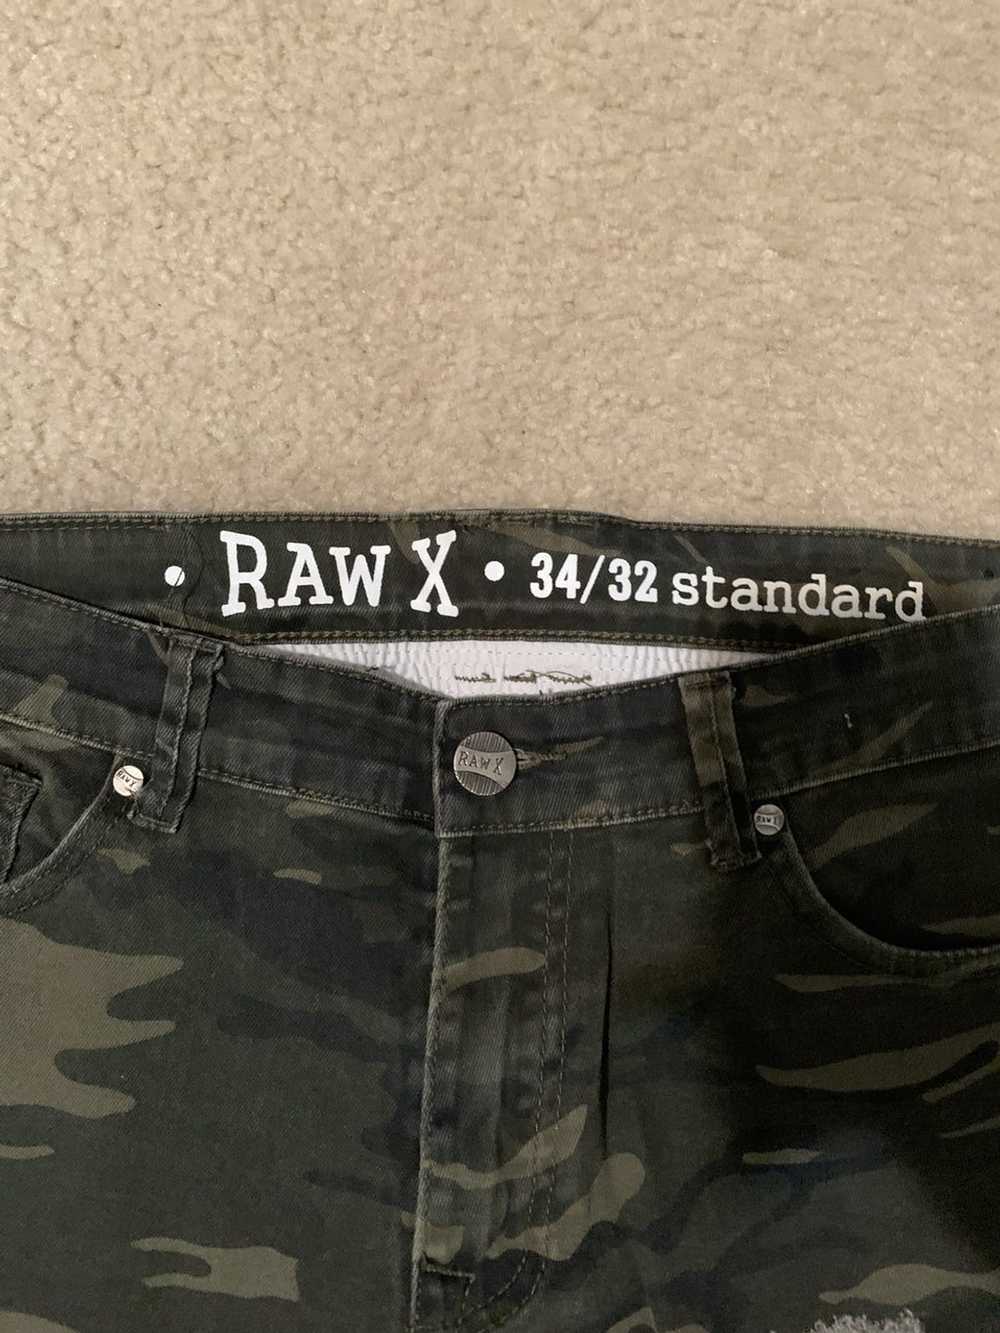 Other Raw X camo jeans - image 3